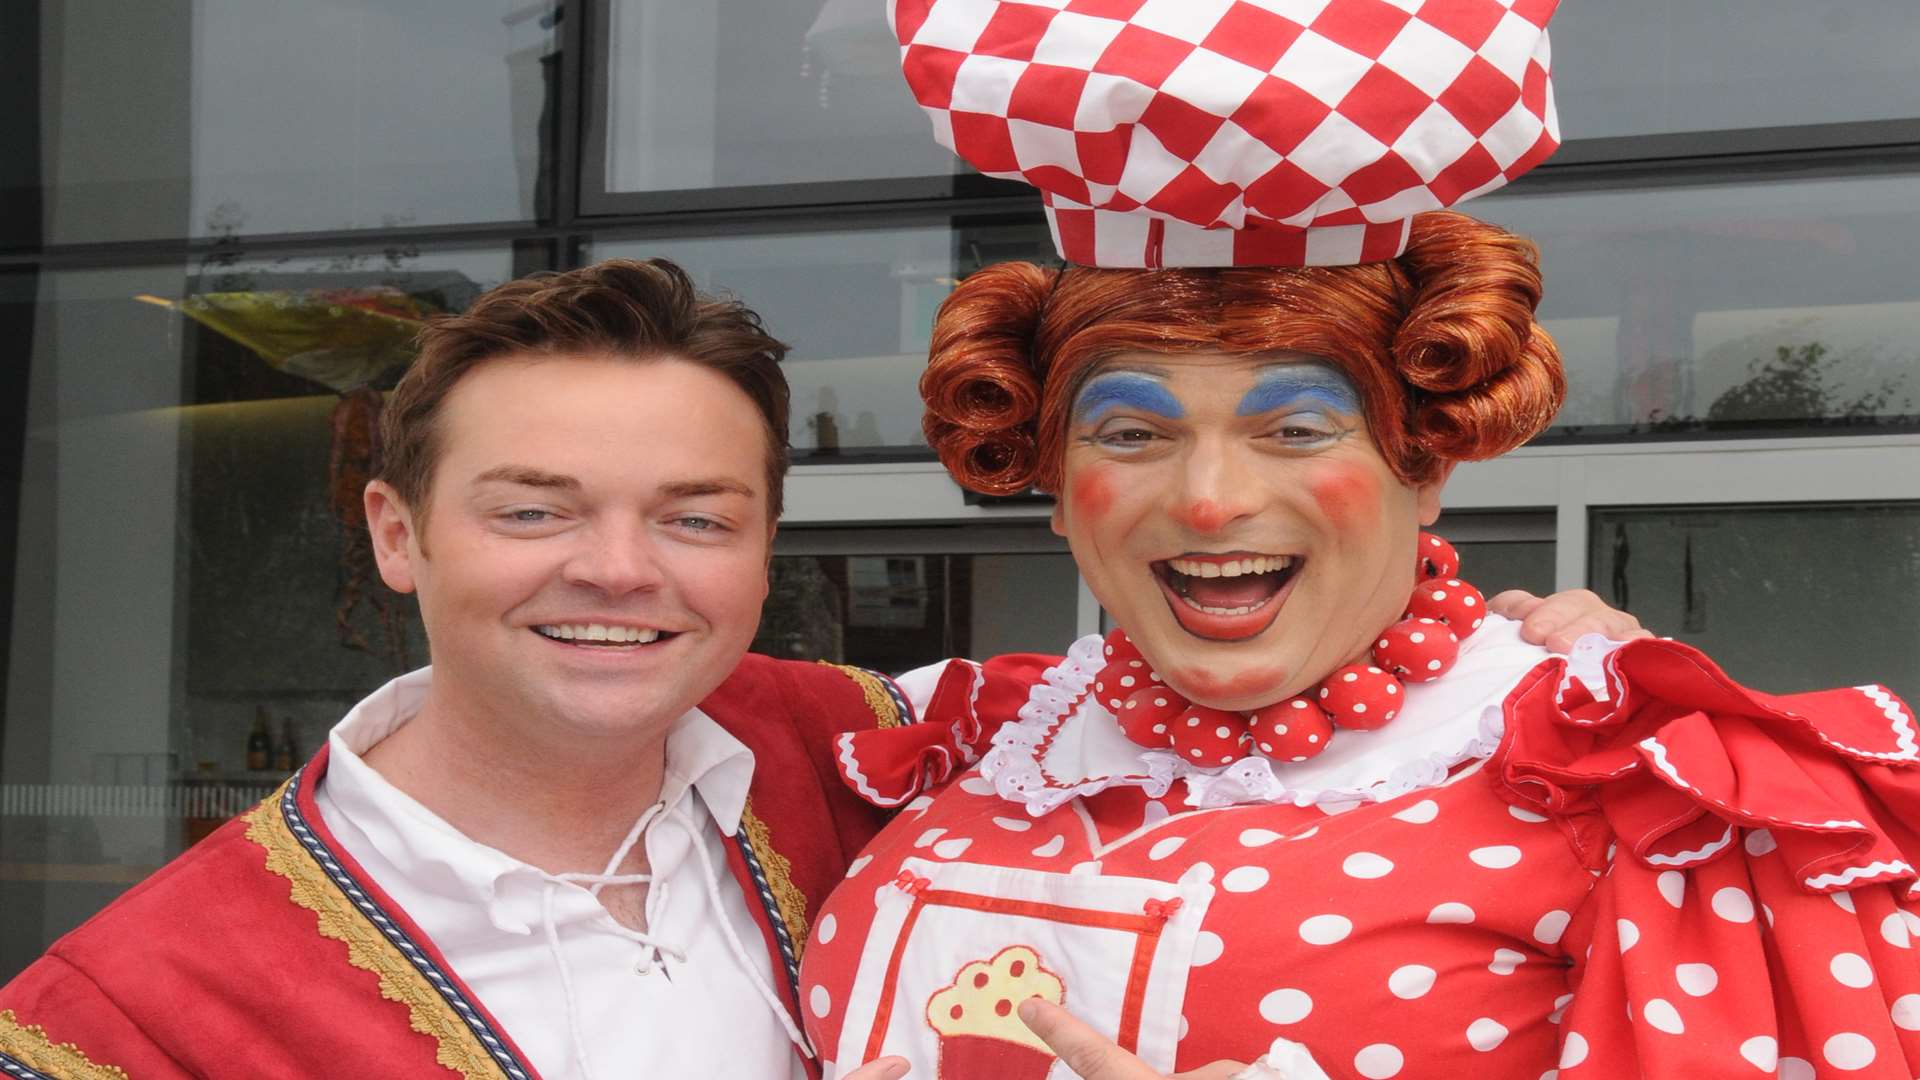 Stars of the Marlowe Theatre's panto this year, Stephen Mulhern and Ben Roddy